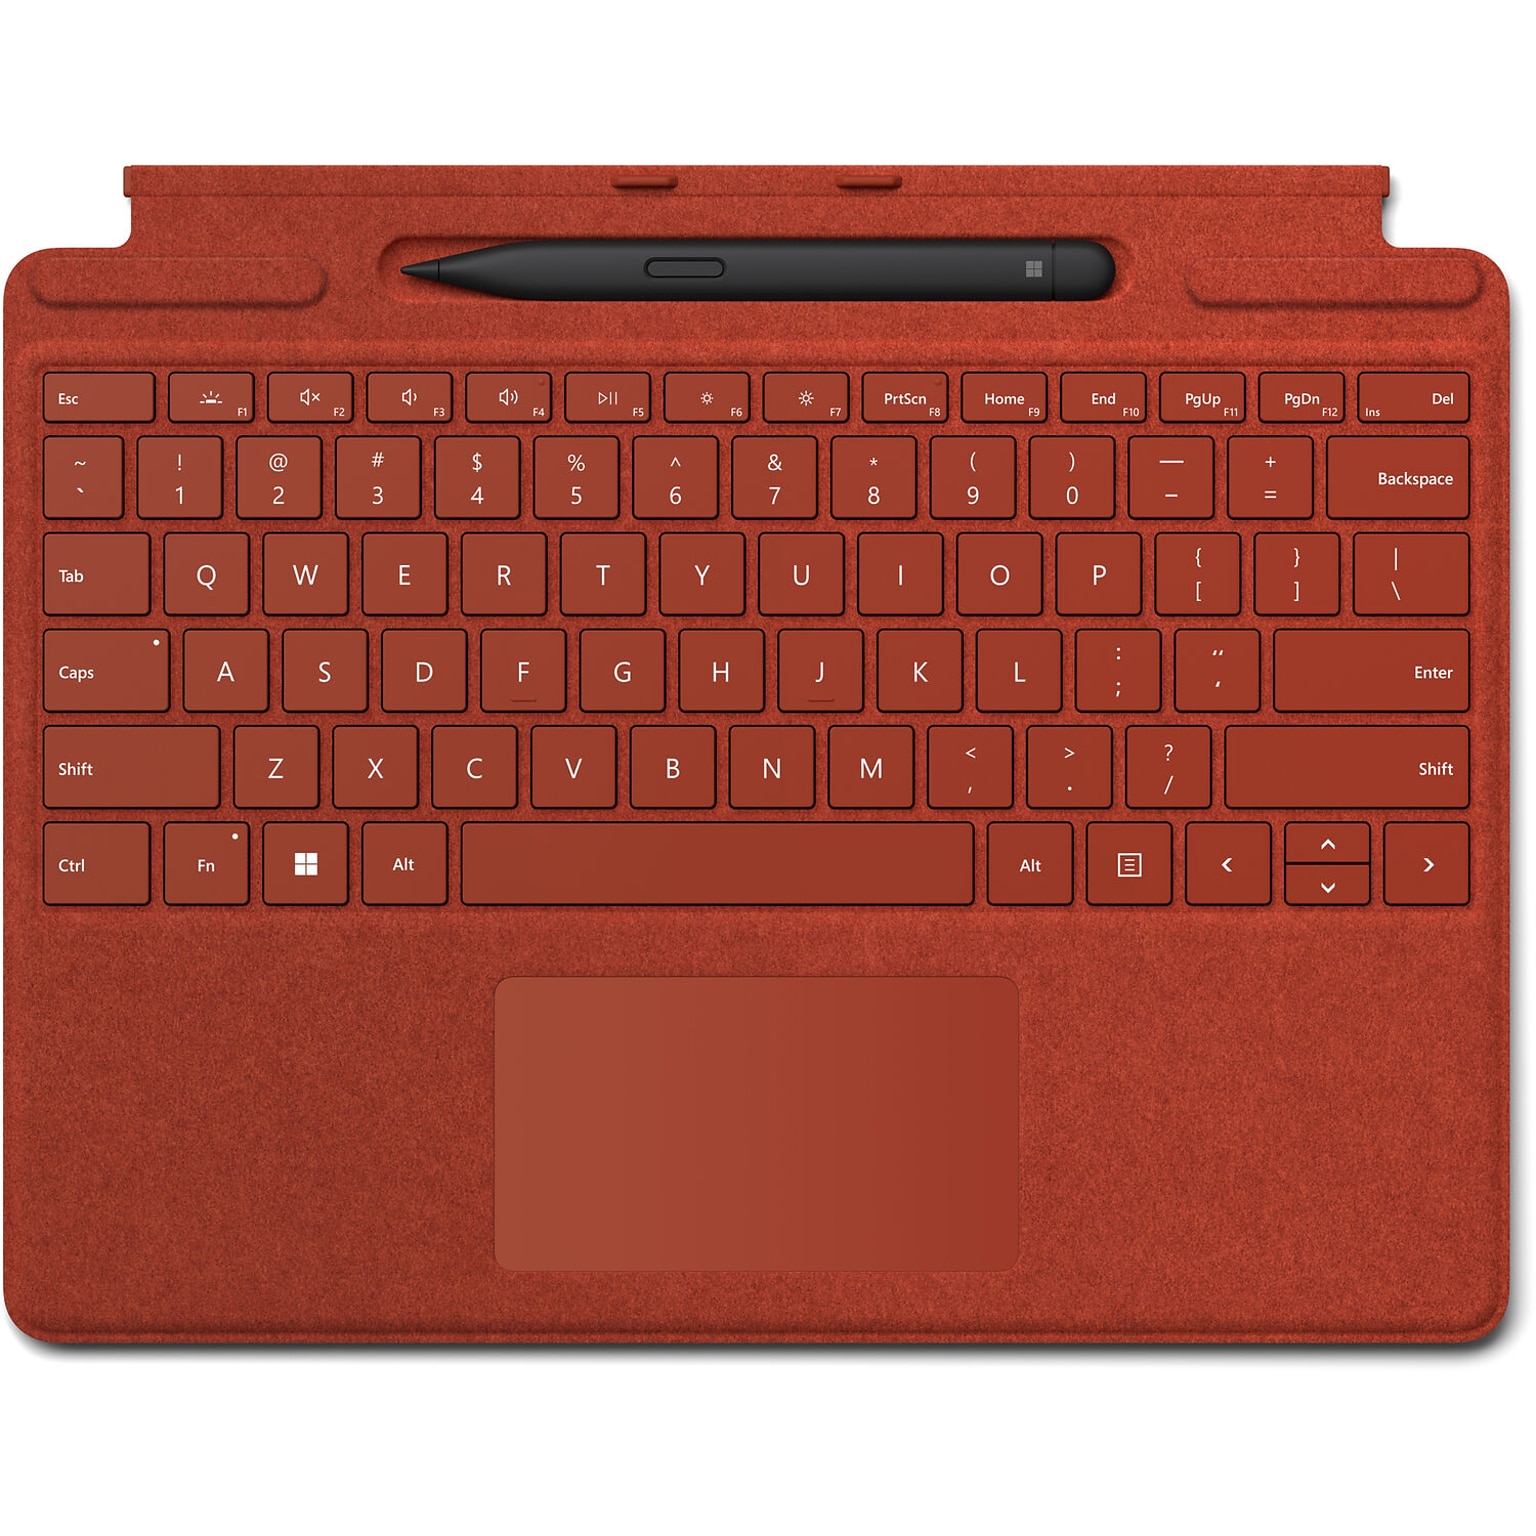 Microsoft 8X6-00021 Surface Pro Signature Fabric Keyboard Cover for 13 Surface Pro, Poppy Red